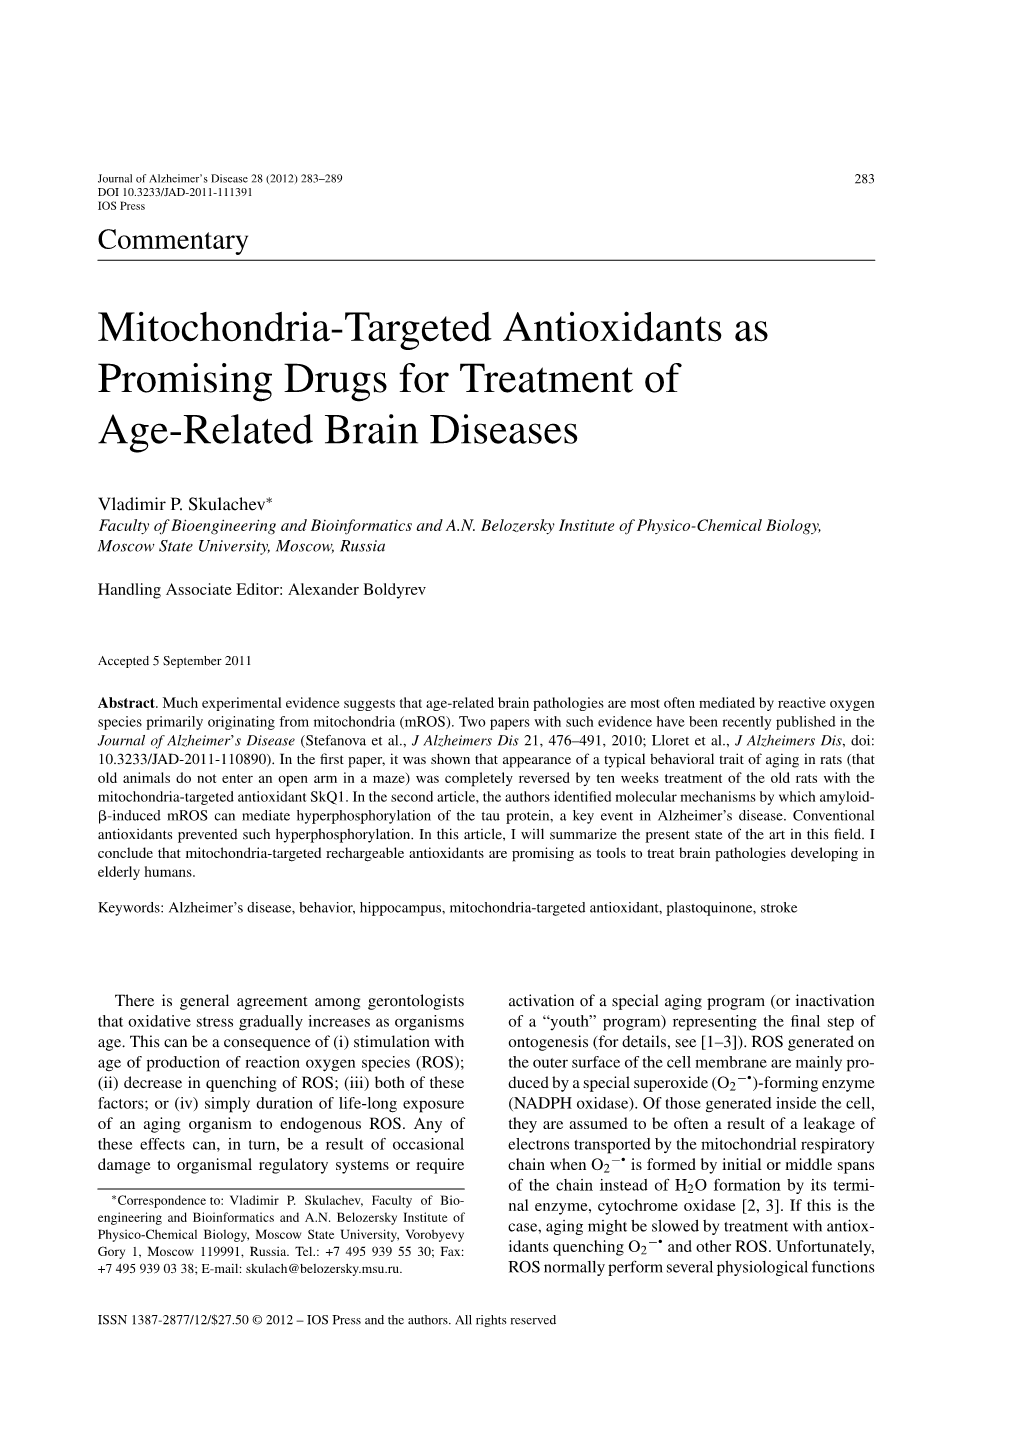 Mitochondria-Targeted Antioxidants As Promising Drugs for Treatment of Age-Related Brain Diseases